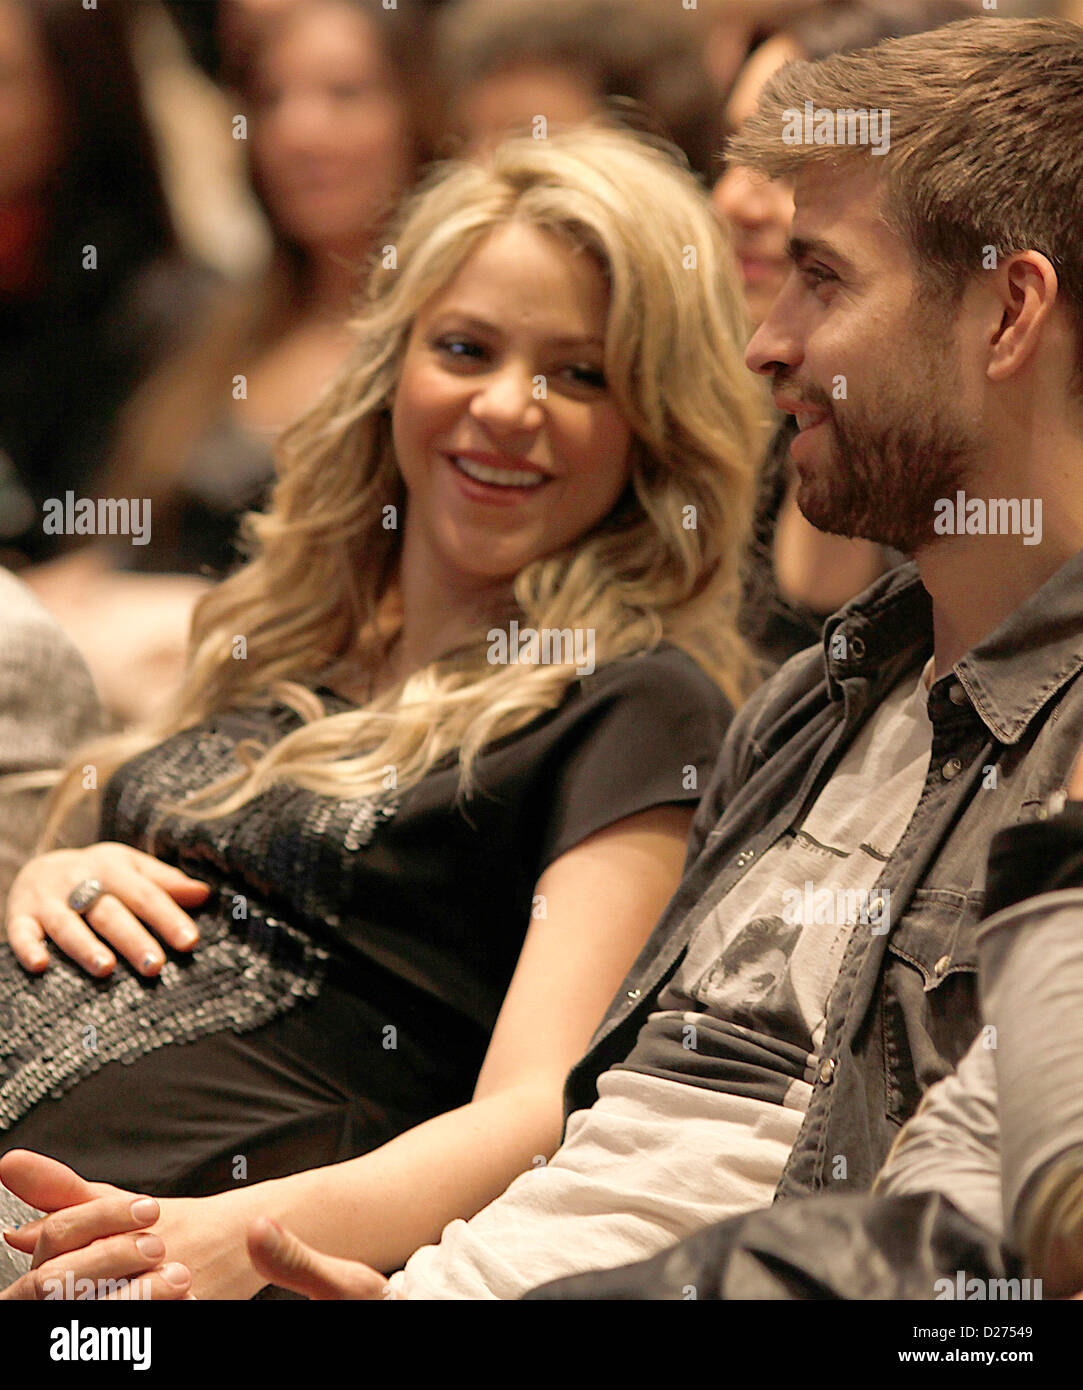 BARCELONA, SPAIN - JANUARY 14: Colombian singer Shakira and footballer Gerard Pique, attend a press conference for her father William Mebarak Chadid latest book presentation 'Al Viento y Al Azar' at the Casa del Llibre bookstore on January 14, 2013 in Barcelona, Spain. Photo by Elkin Cabarcas Stock Photo